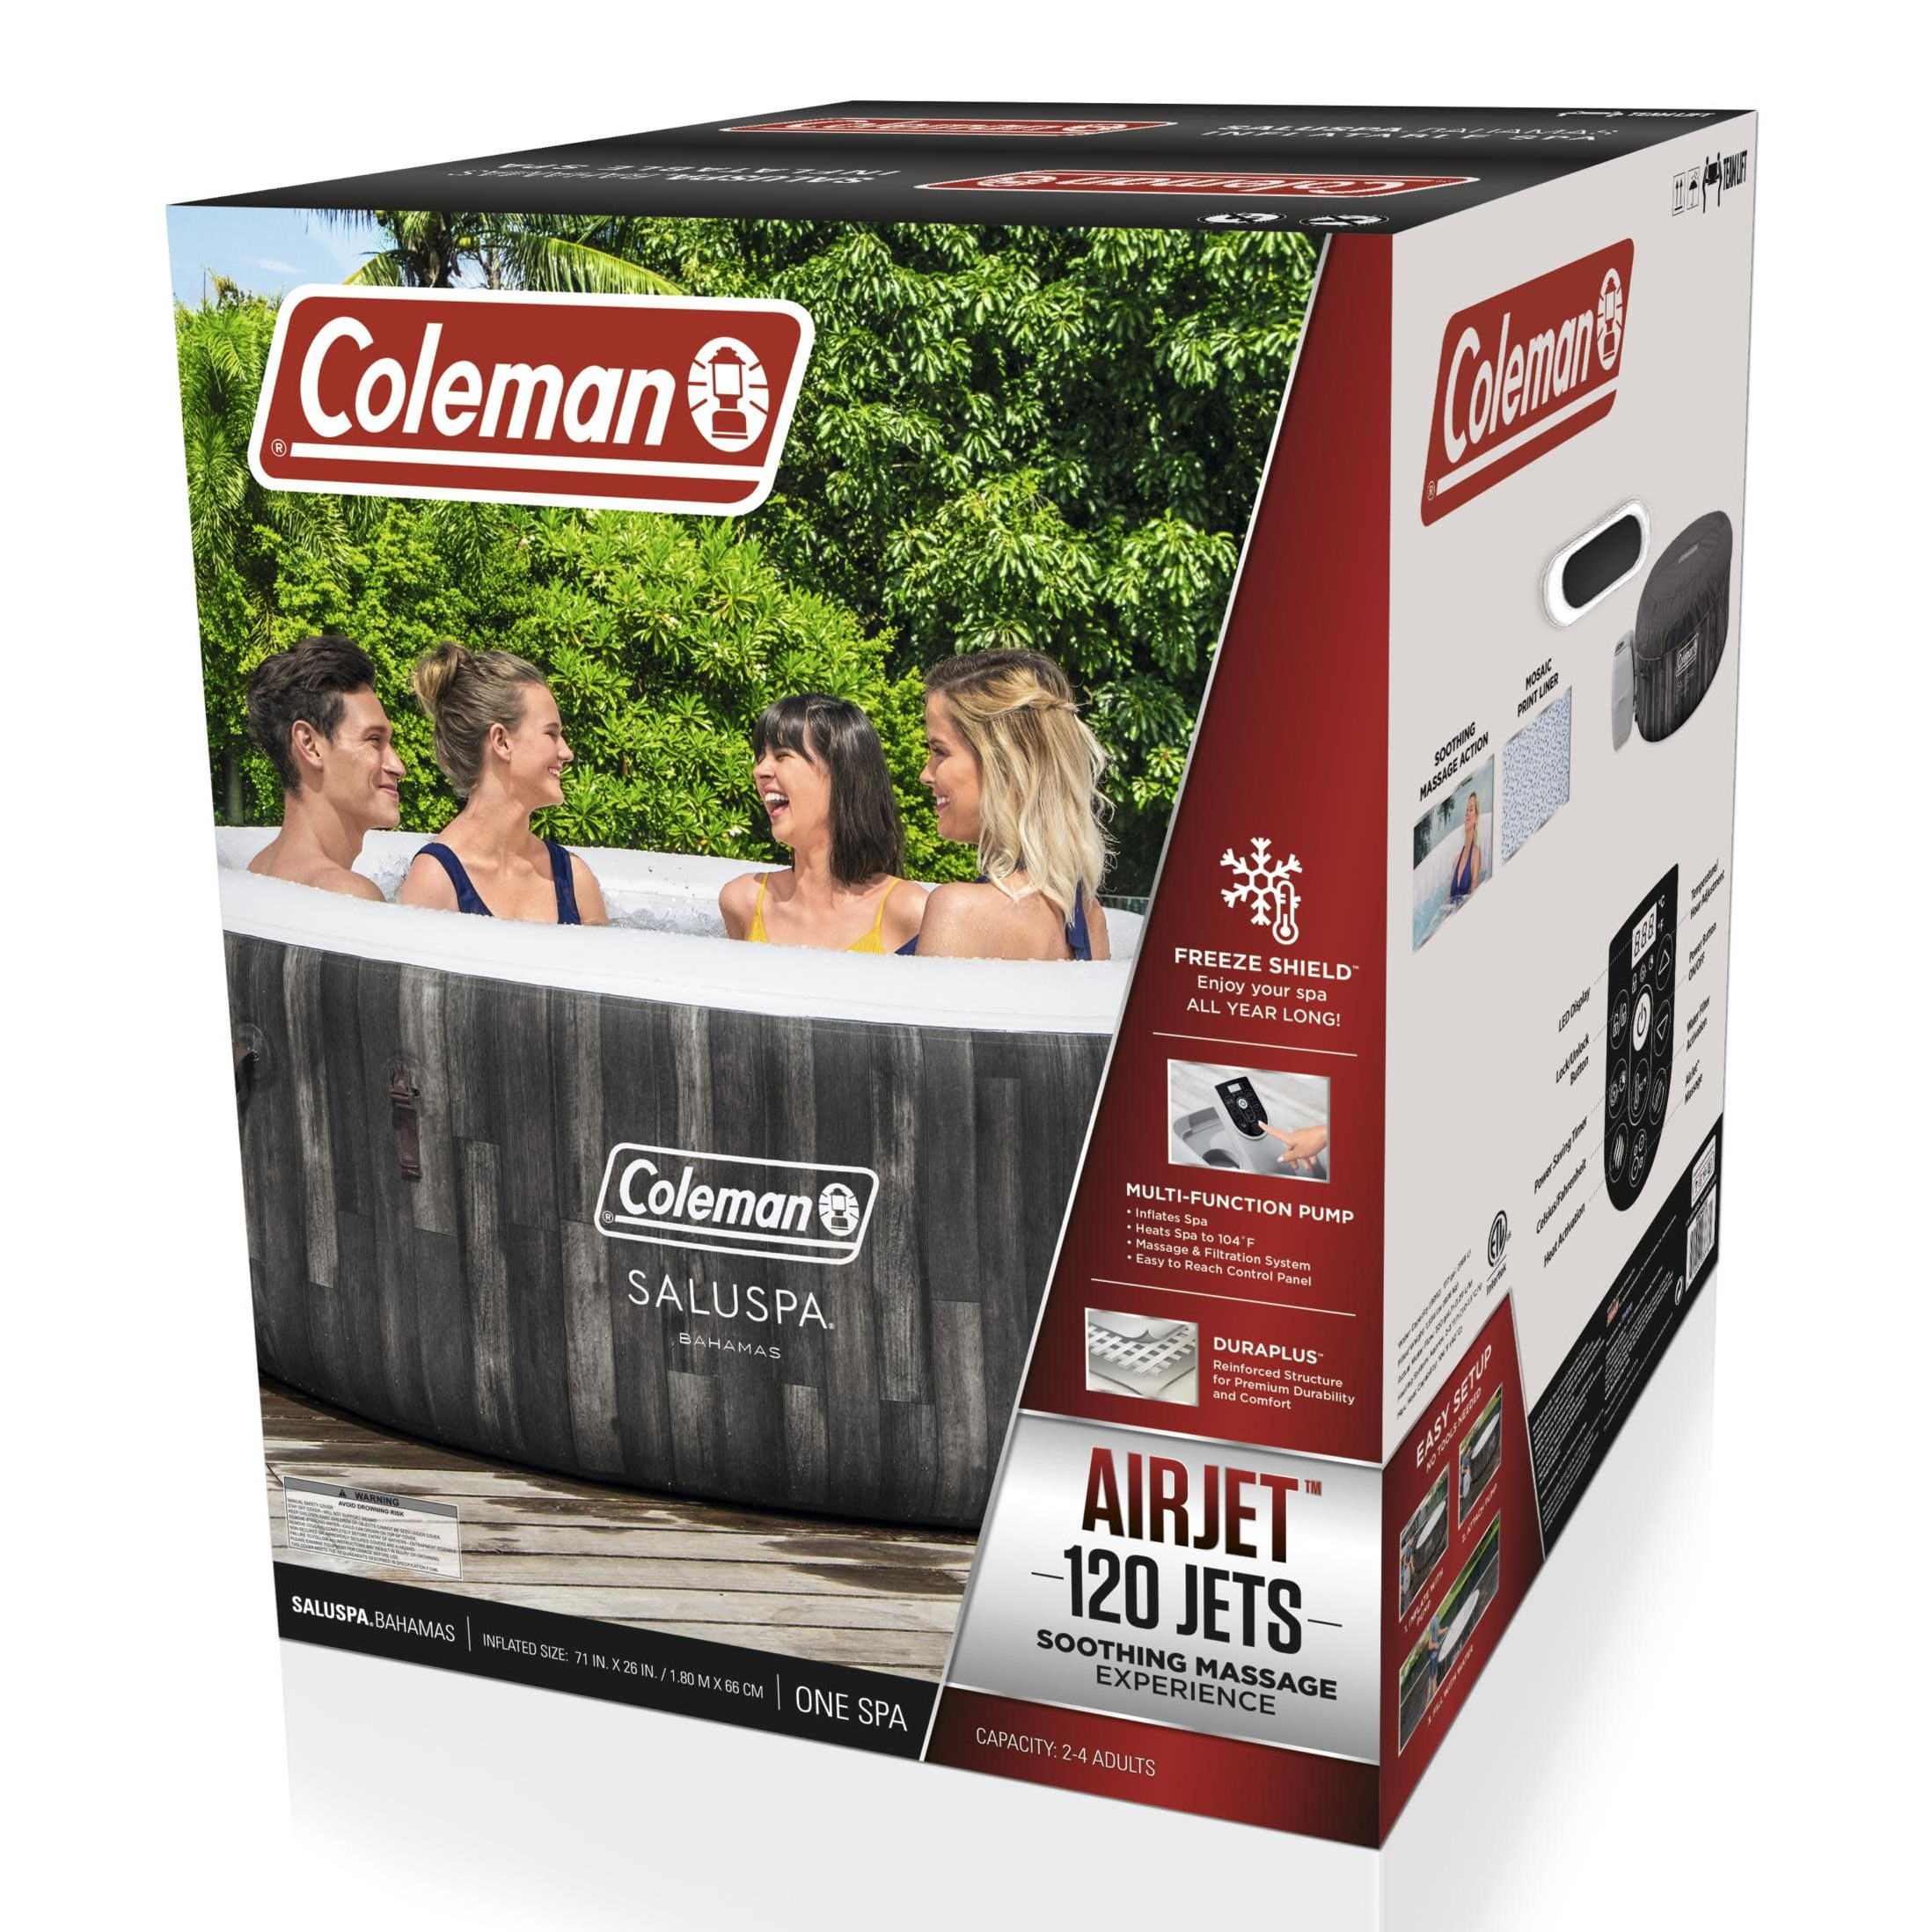 Coleman 71" x 26" Bahamas AirJet Spa Outdoor 177 gal. Spring Inflatable Hot Tub, 104˚F - image 3 of 10